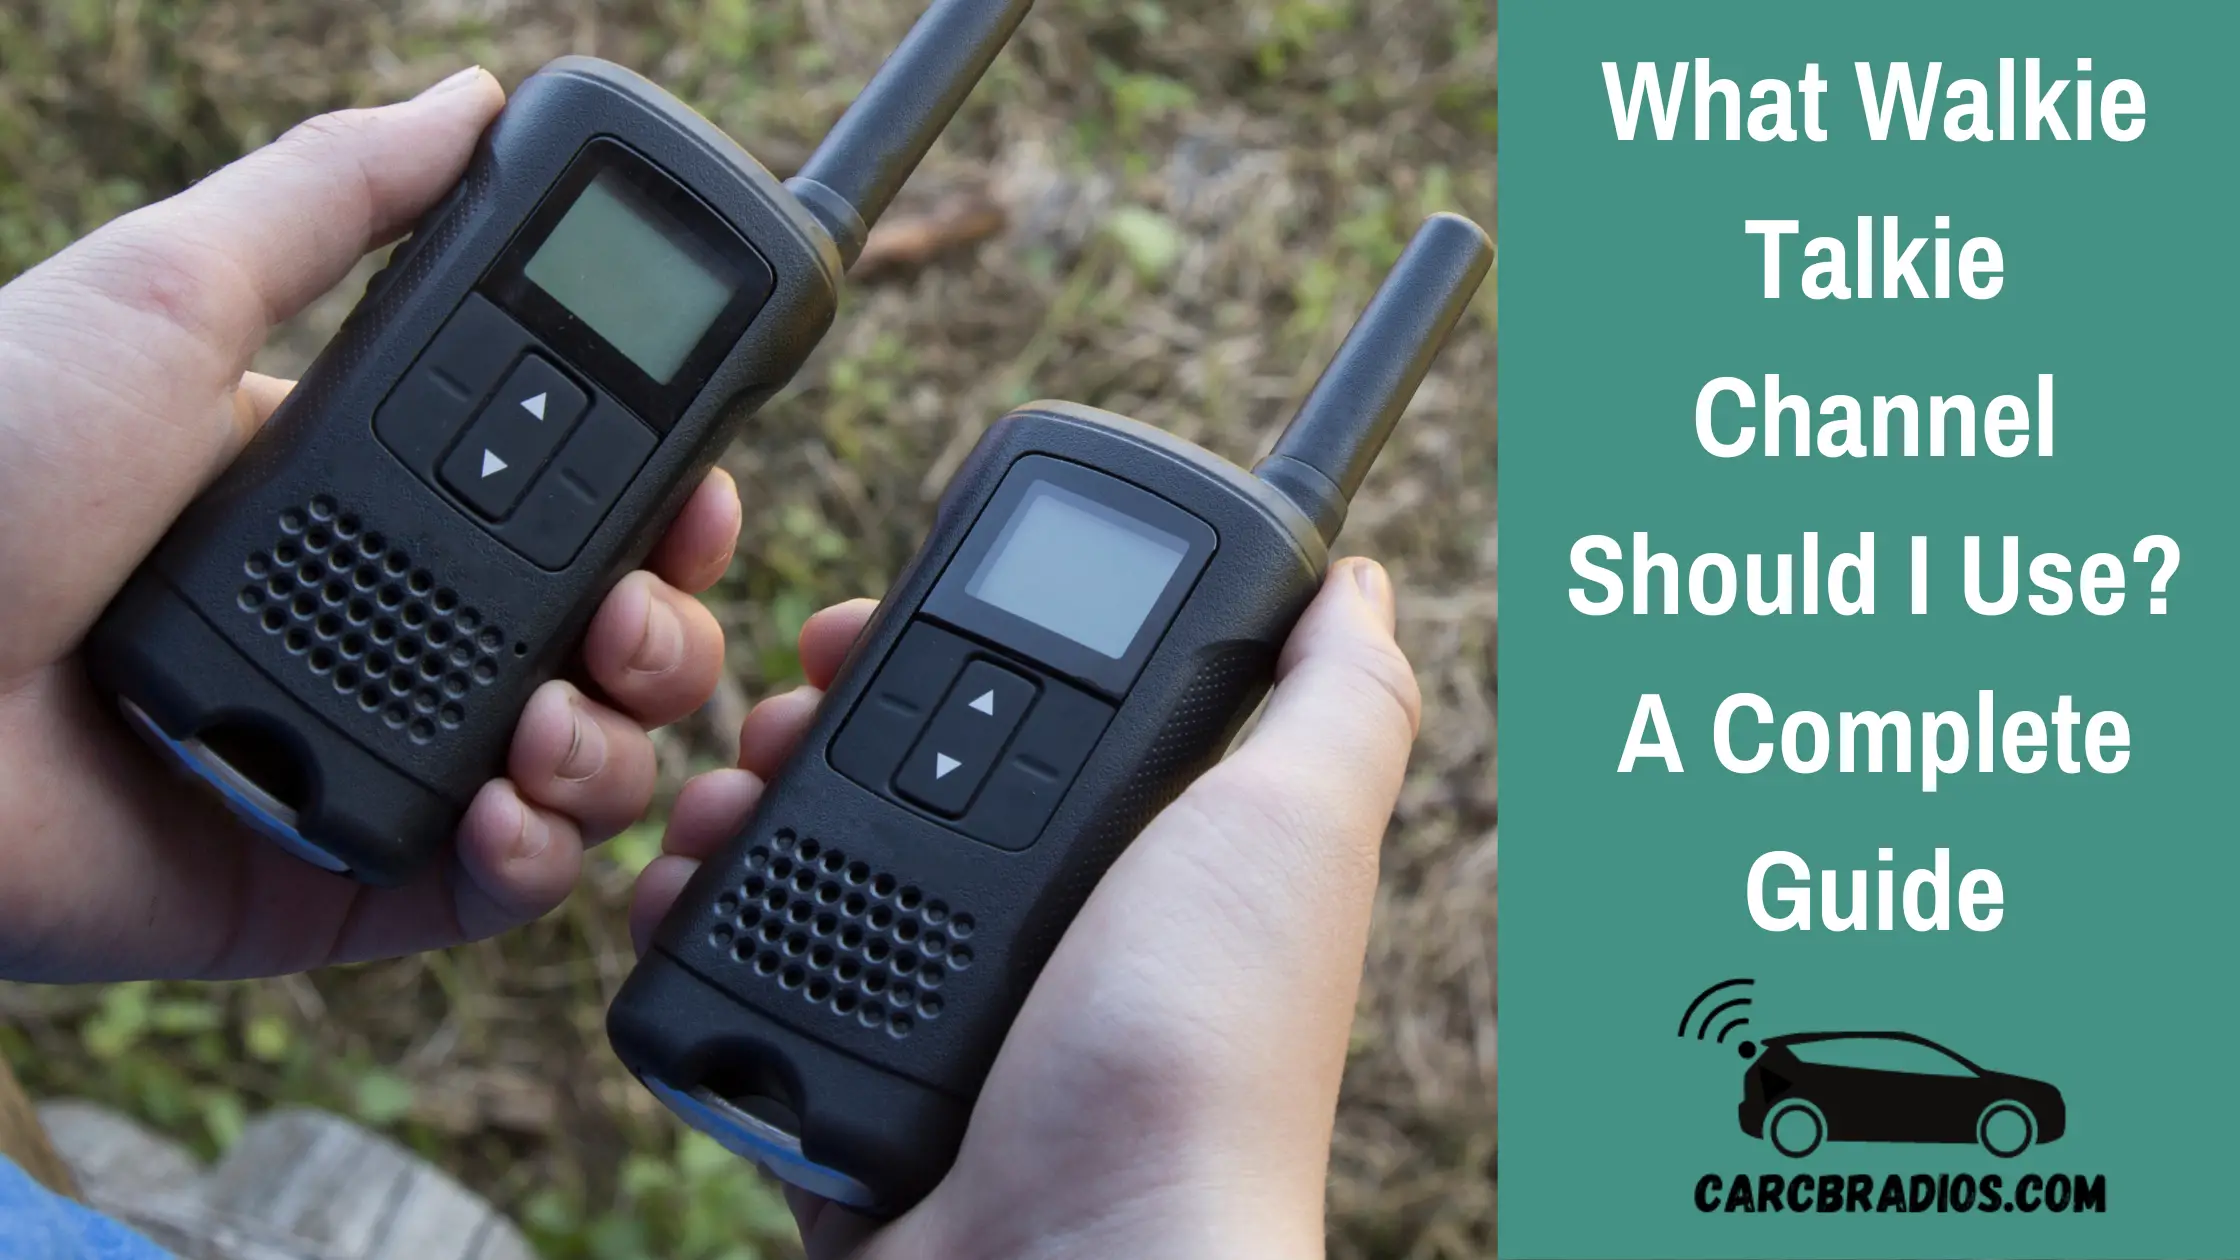 What Walkie Talkie Channel Should I Use? A Complete Guide